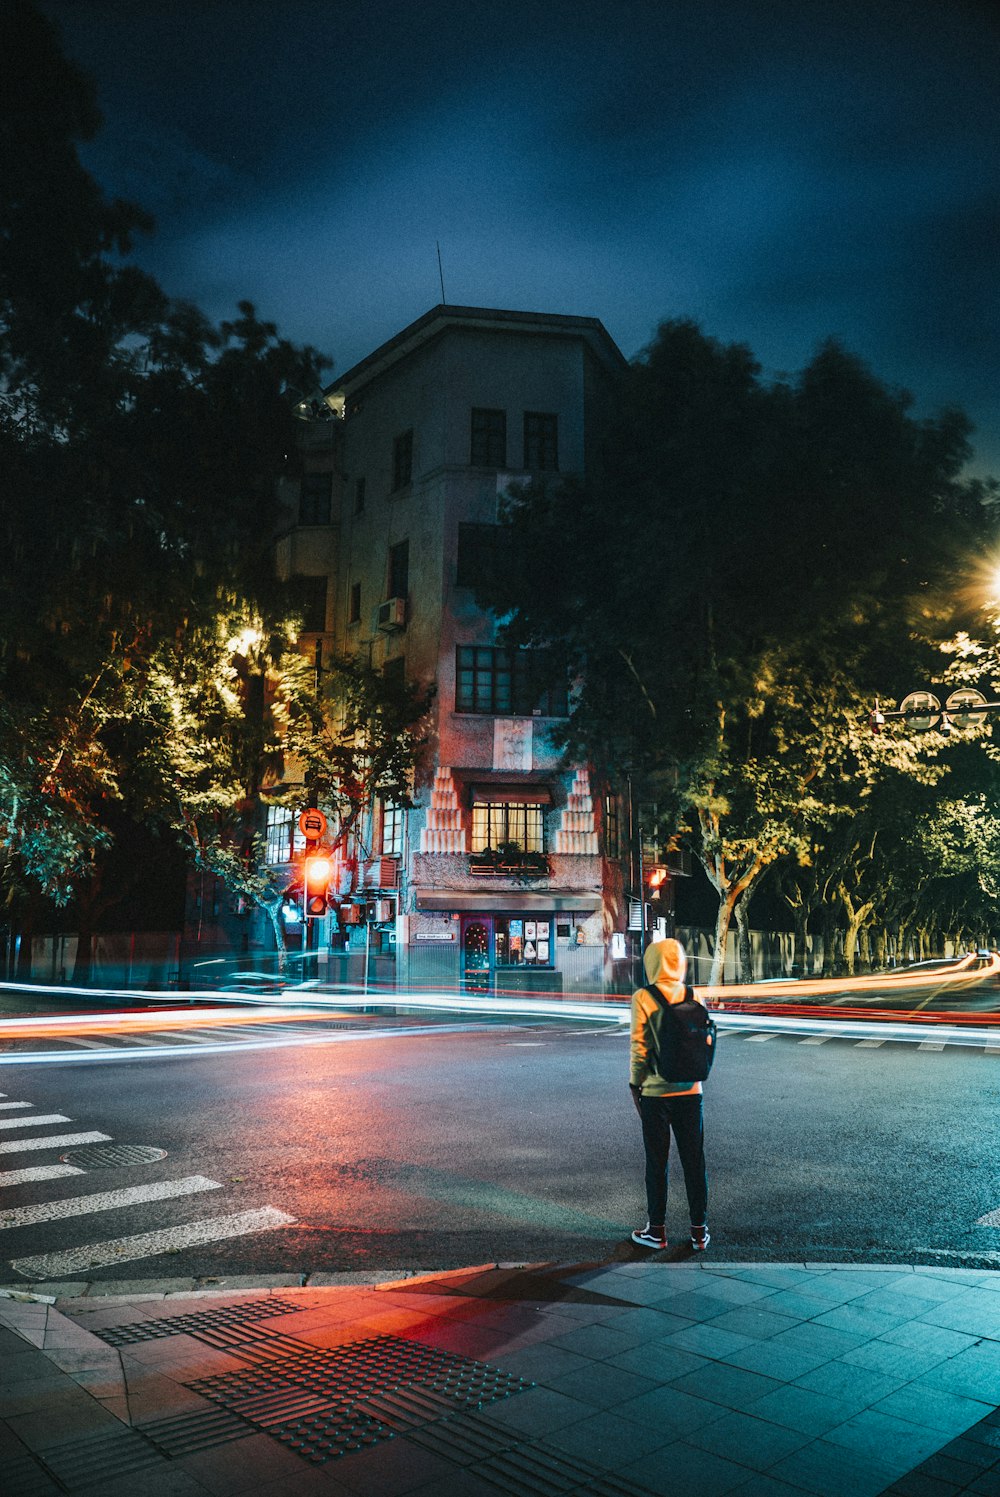 a person standing on a street corner at night